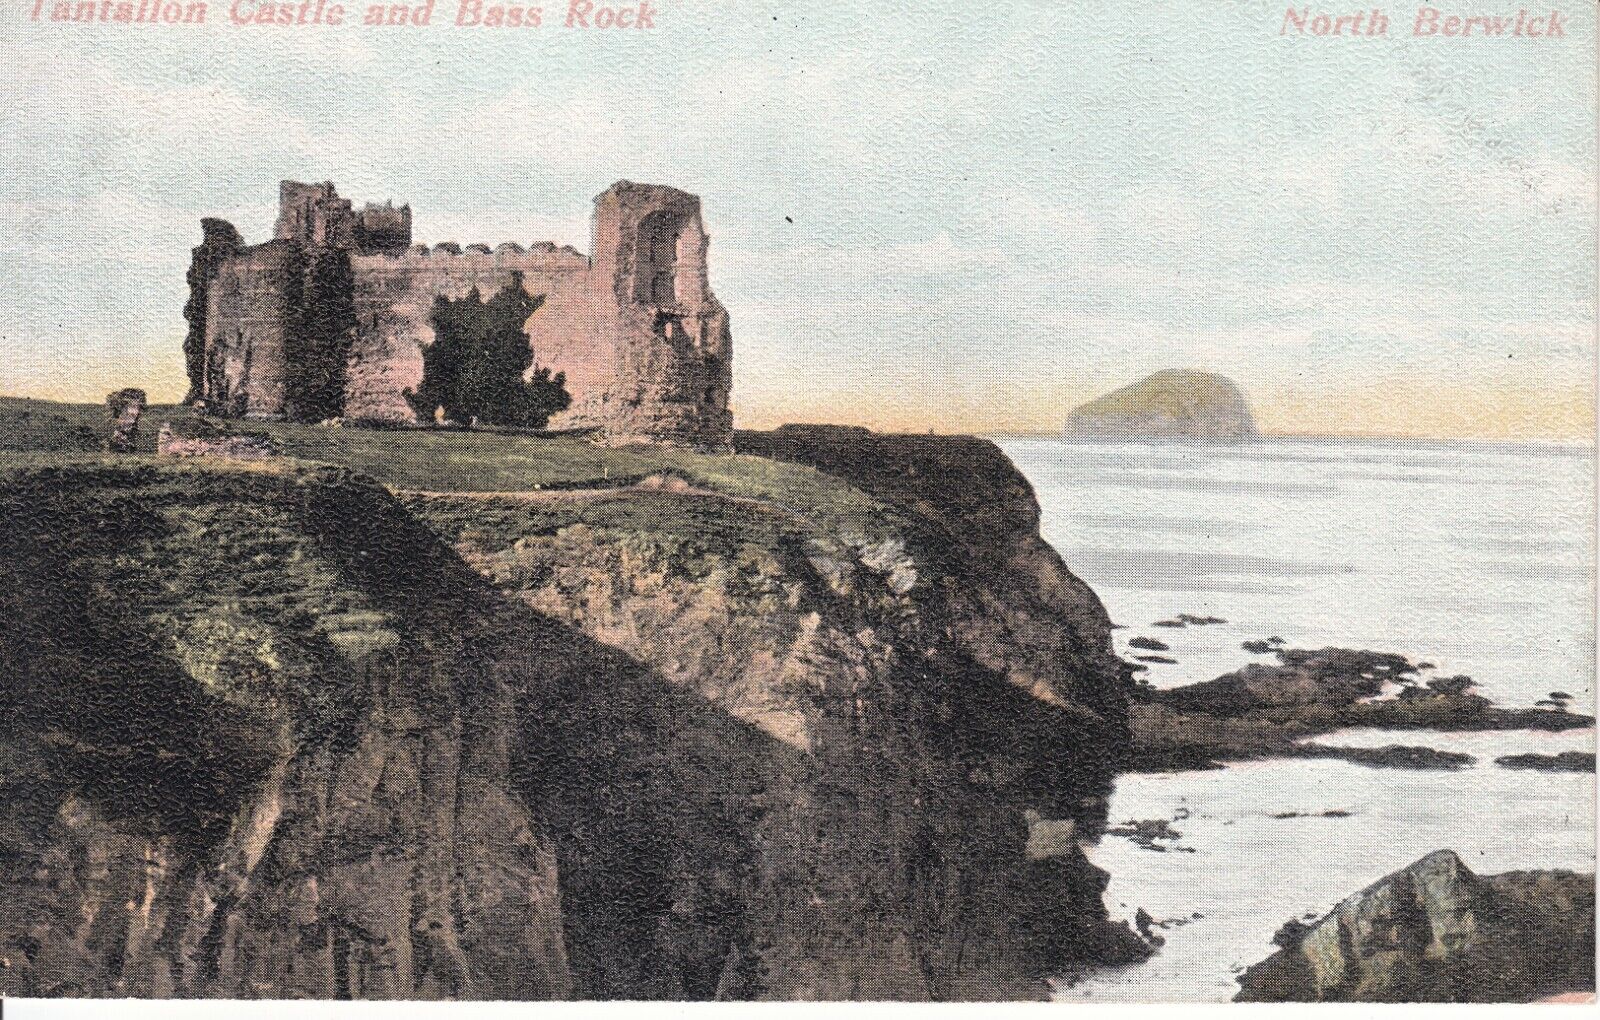 House Clearance - Service of Tantallon Castle and Bass Rock, North Berwick